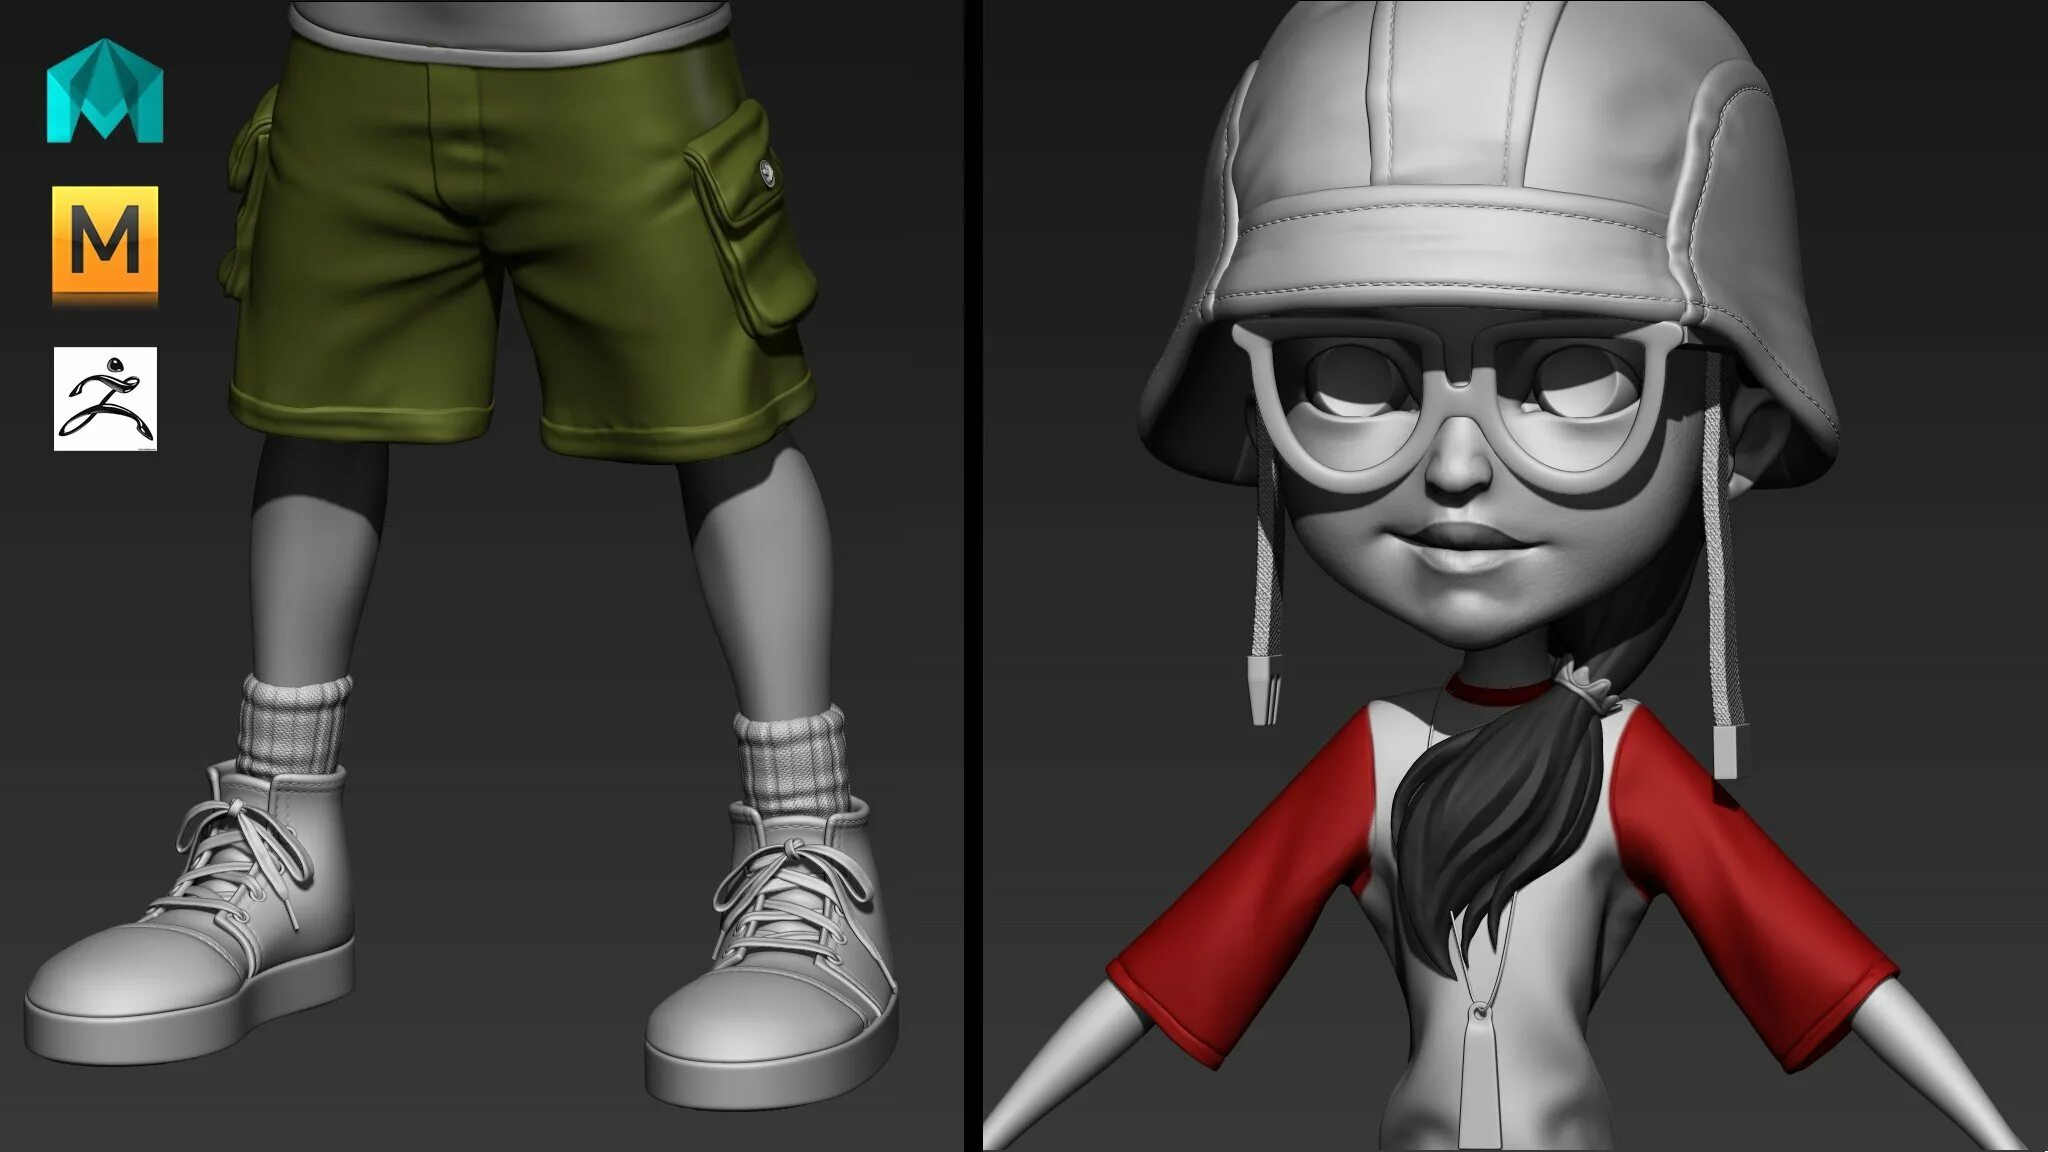 Made your character. Zbrush игры. Кло 3д аватар. Zbrush game character. Zbrush character course.